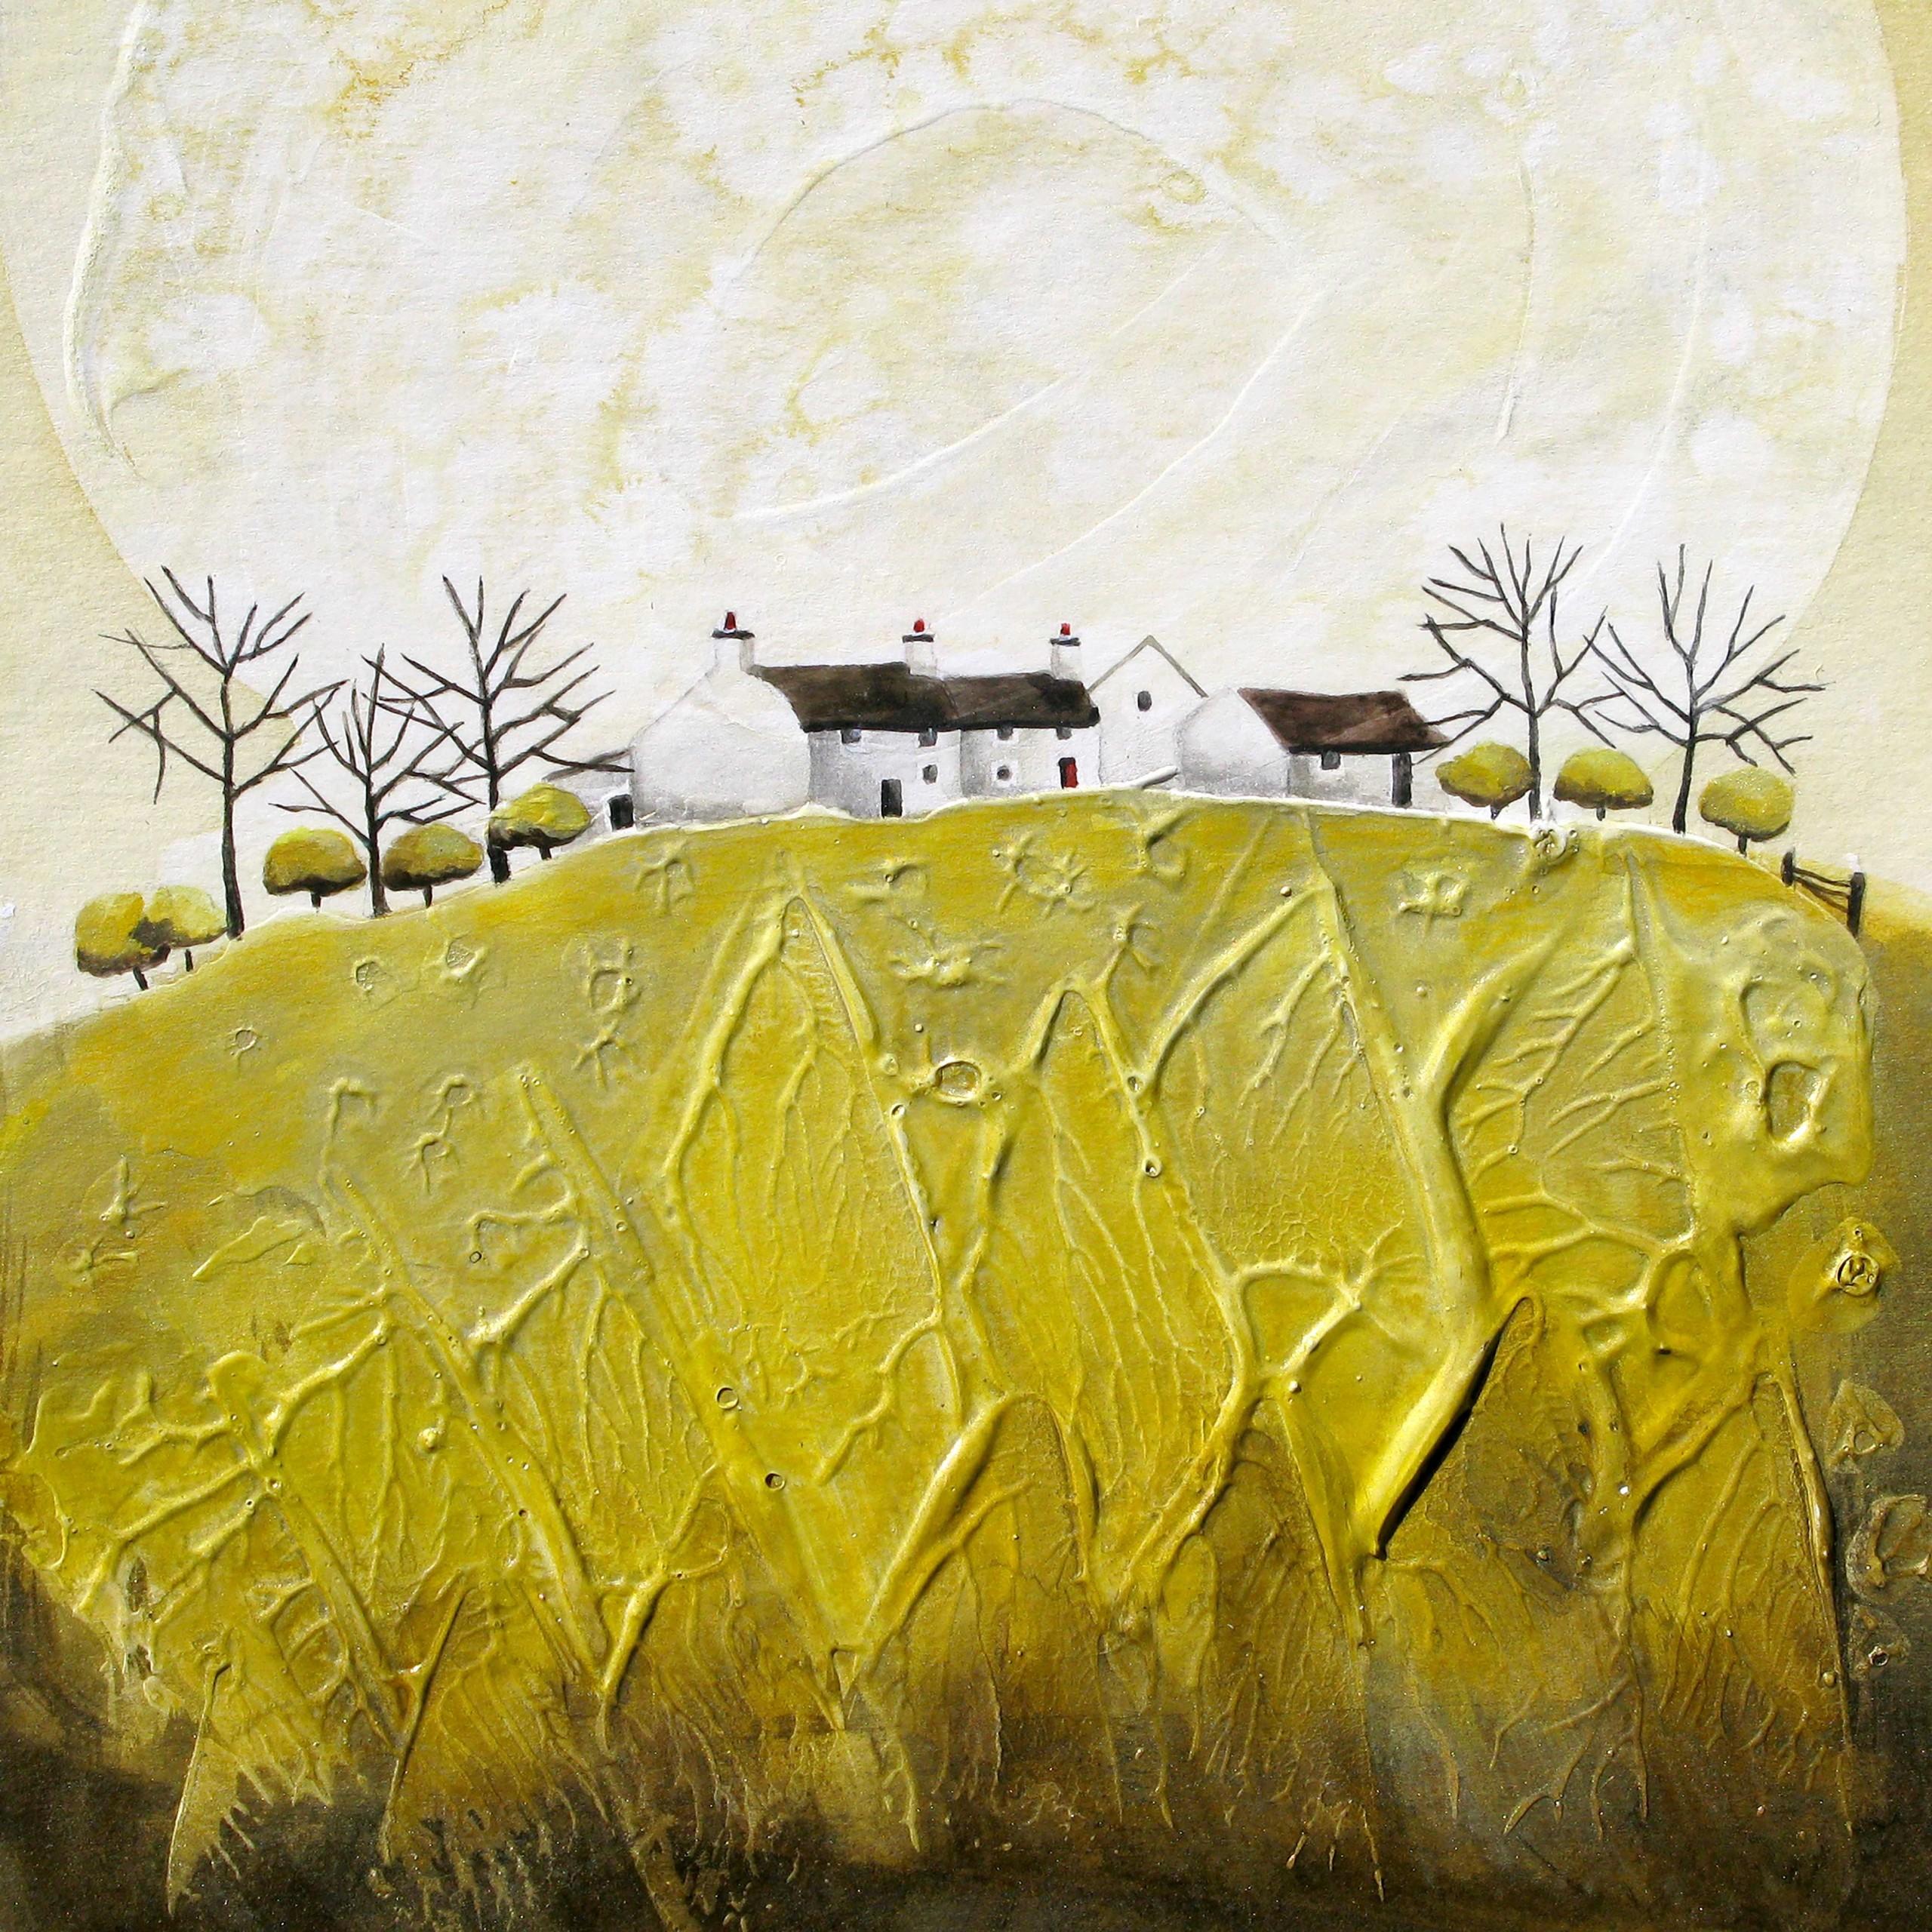 Crater Valley Farm and Crater Cottages 3 diptych - Painting by Anya Simmons